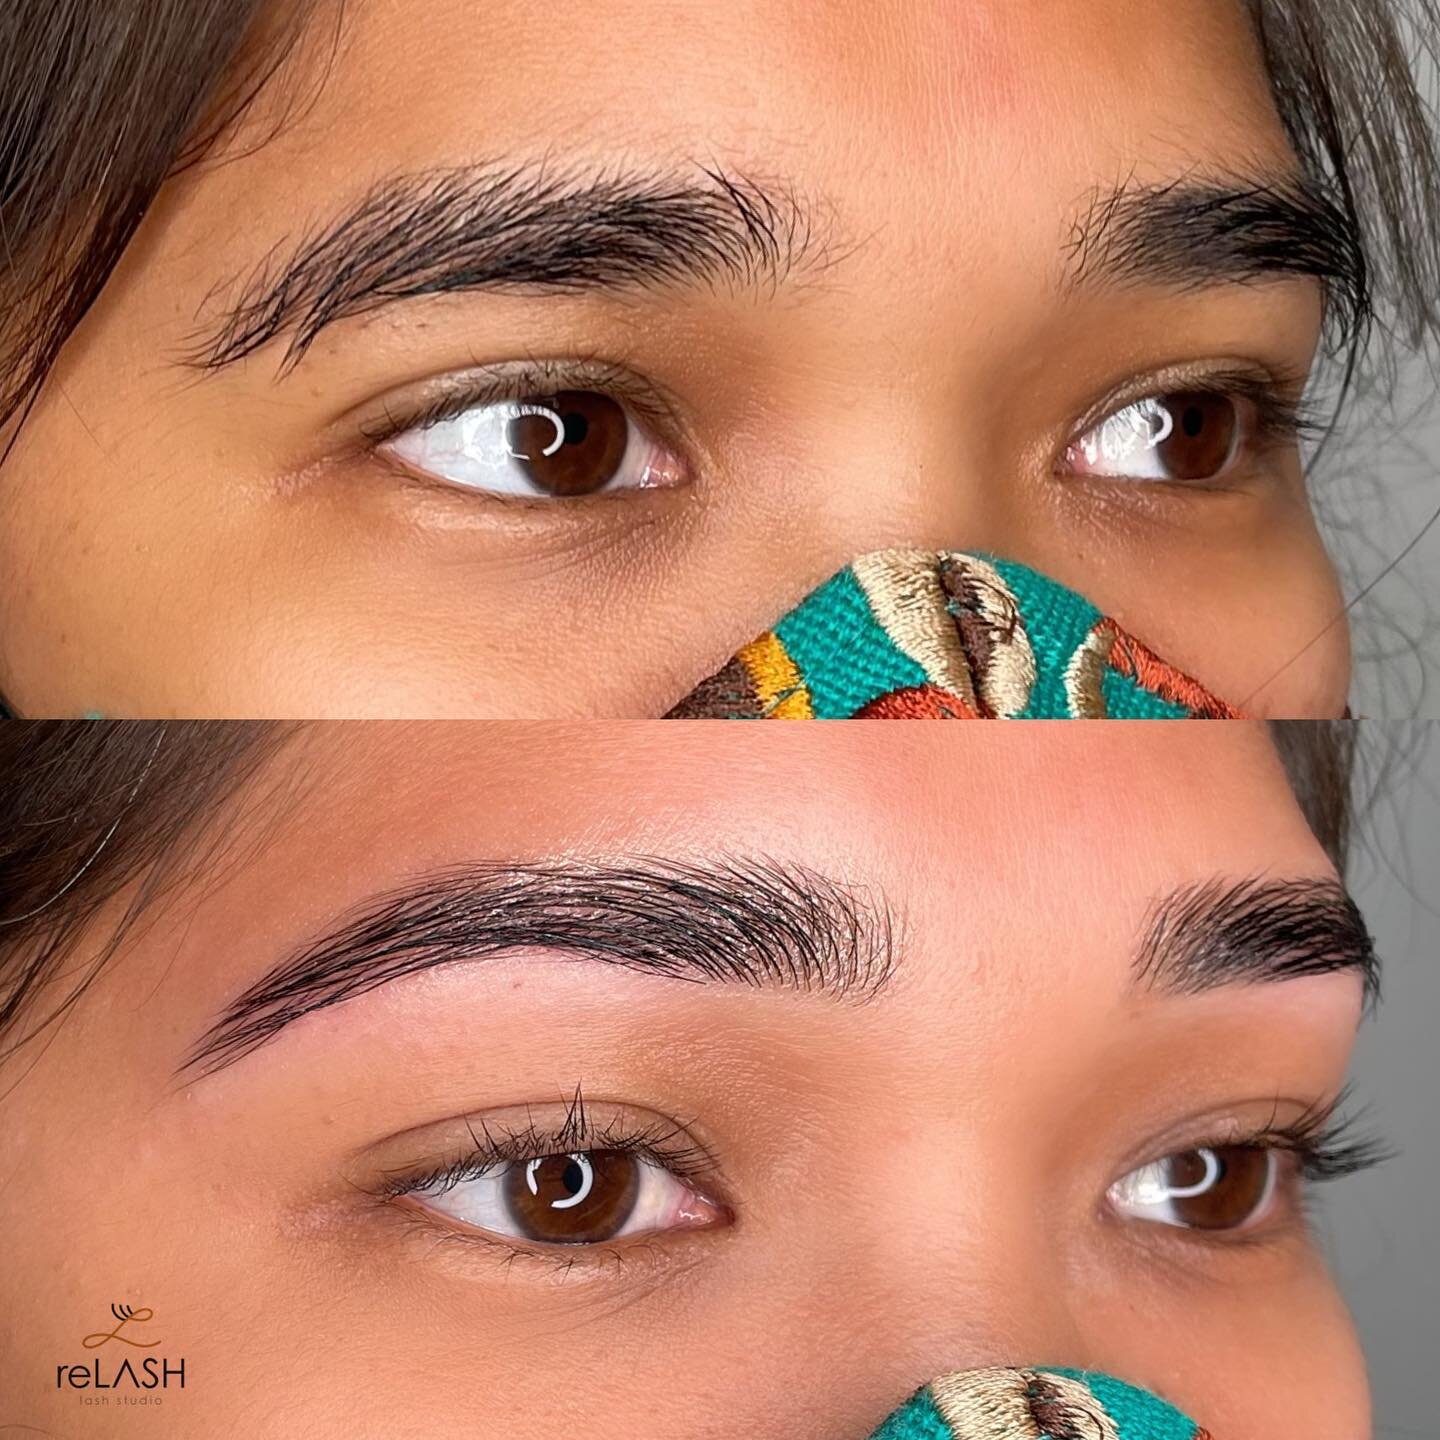 Brow Laminate Combo + Keratin Lash Lift Combo + Shine Repair Lash &amp; Brow Treatment + Lash Botox Treatment 🪄 

Eyebrows are one of the most important facial features you have.

Here are 7 reasons why eyebrow shaping is so important:

#1 Well-shap